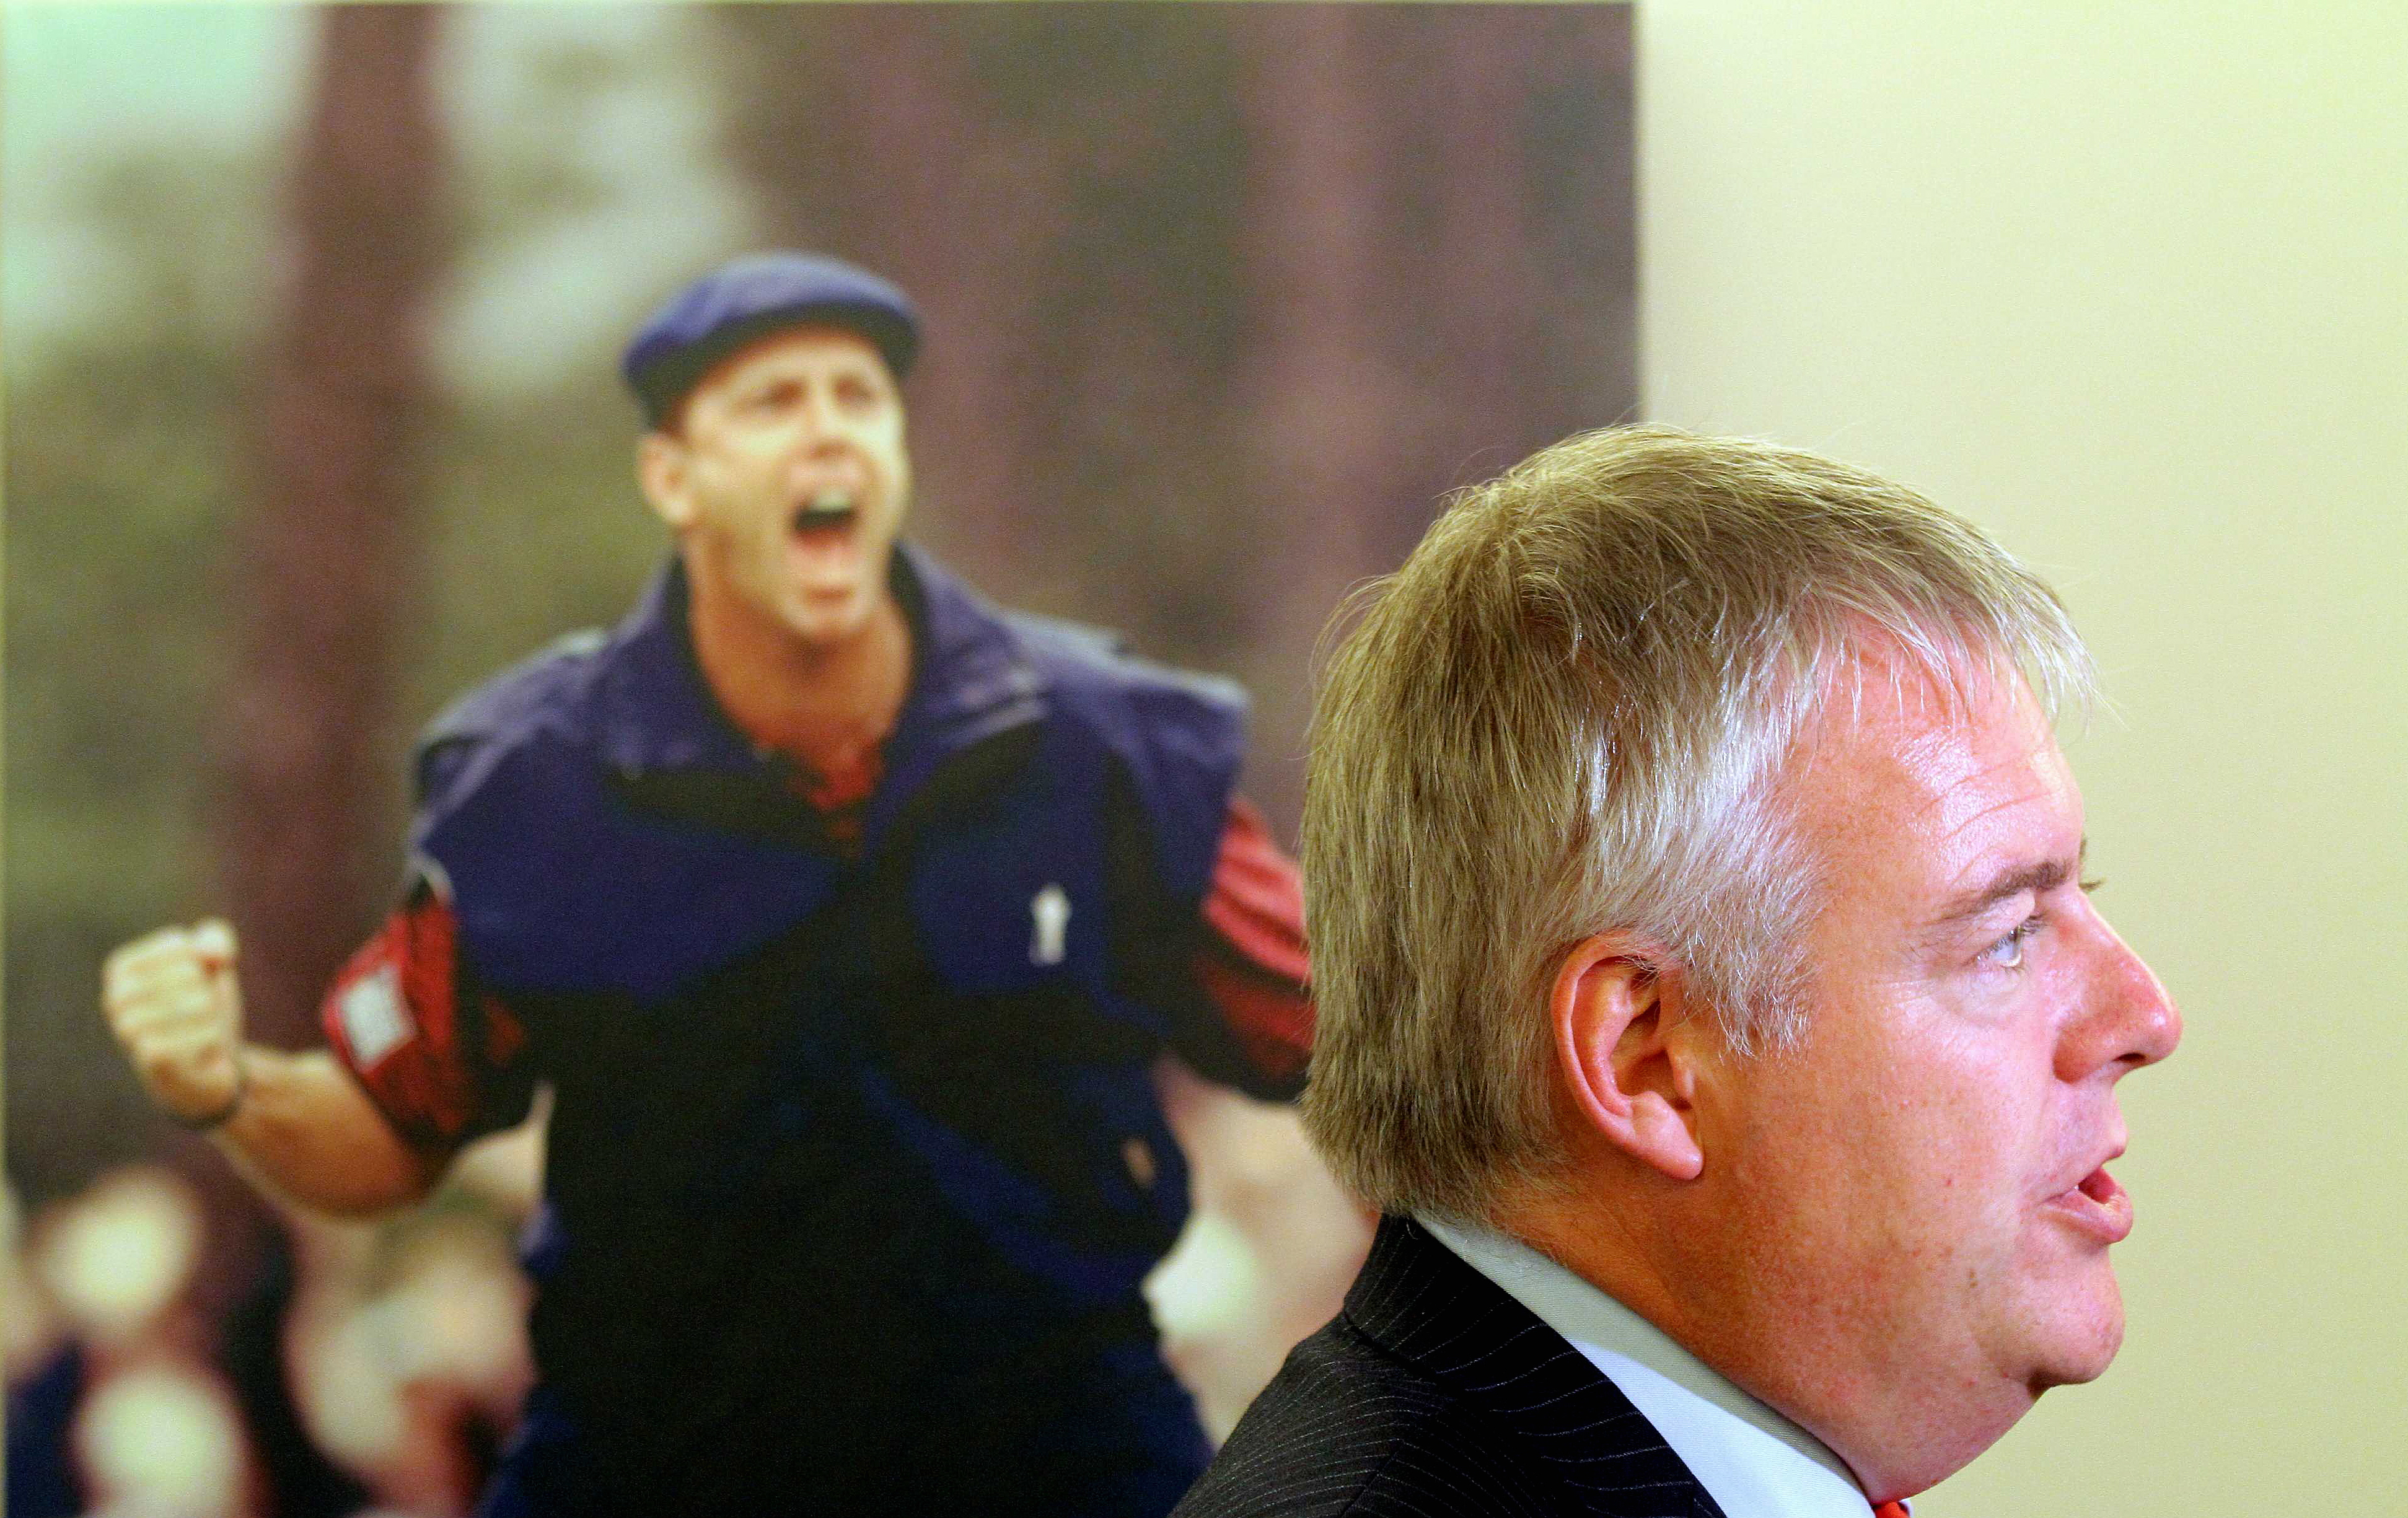 WORDS STEPHEN MOSS FOR G2 Pictured: Wales First Minister Carwyn Jones next to a picture of american golfer Payne Stewart celebrating his win on the last green of the 1999 US Open in North Carolina. Tuesday 14 September 2010 Re: The effect that the Ryder Cup 2010 which will be held at the caltic Manor resort, will have to nearby areas such as Ringland in Gwent, south Wales.